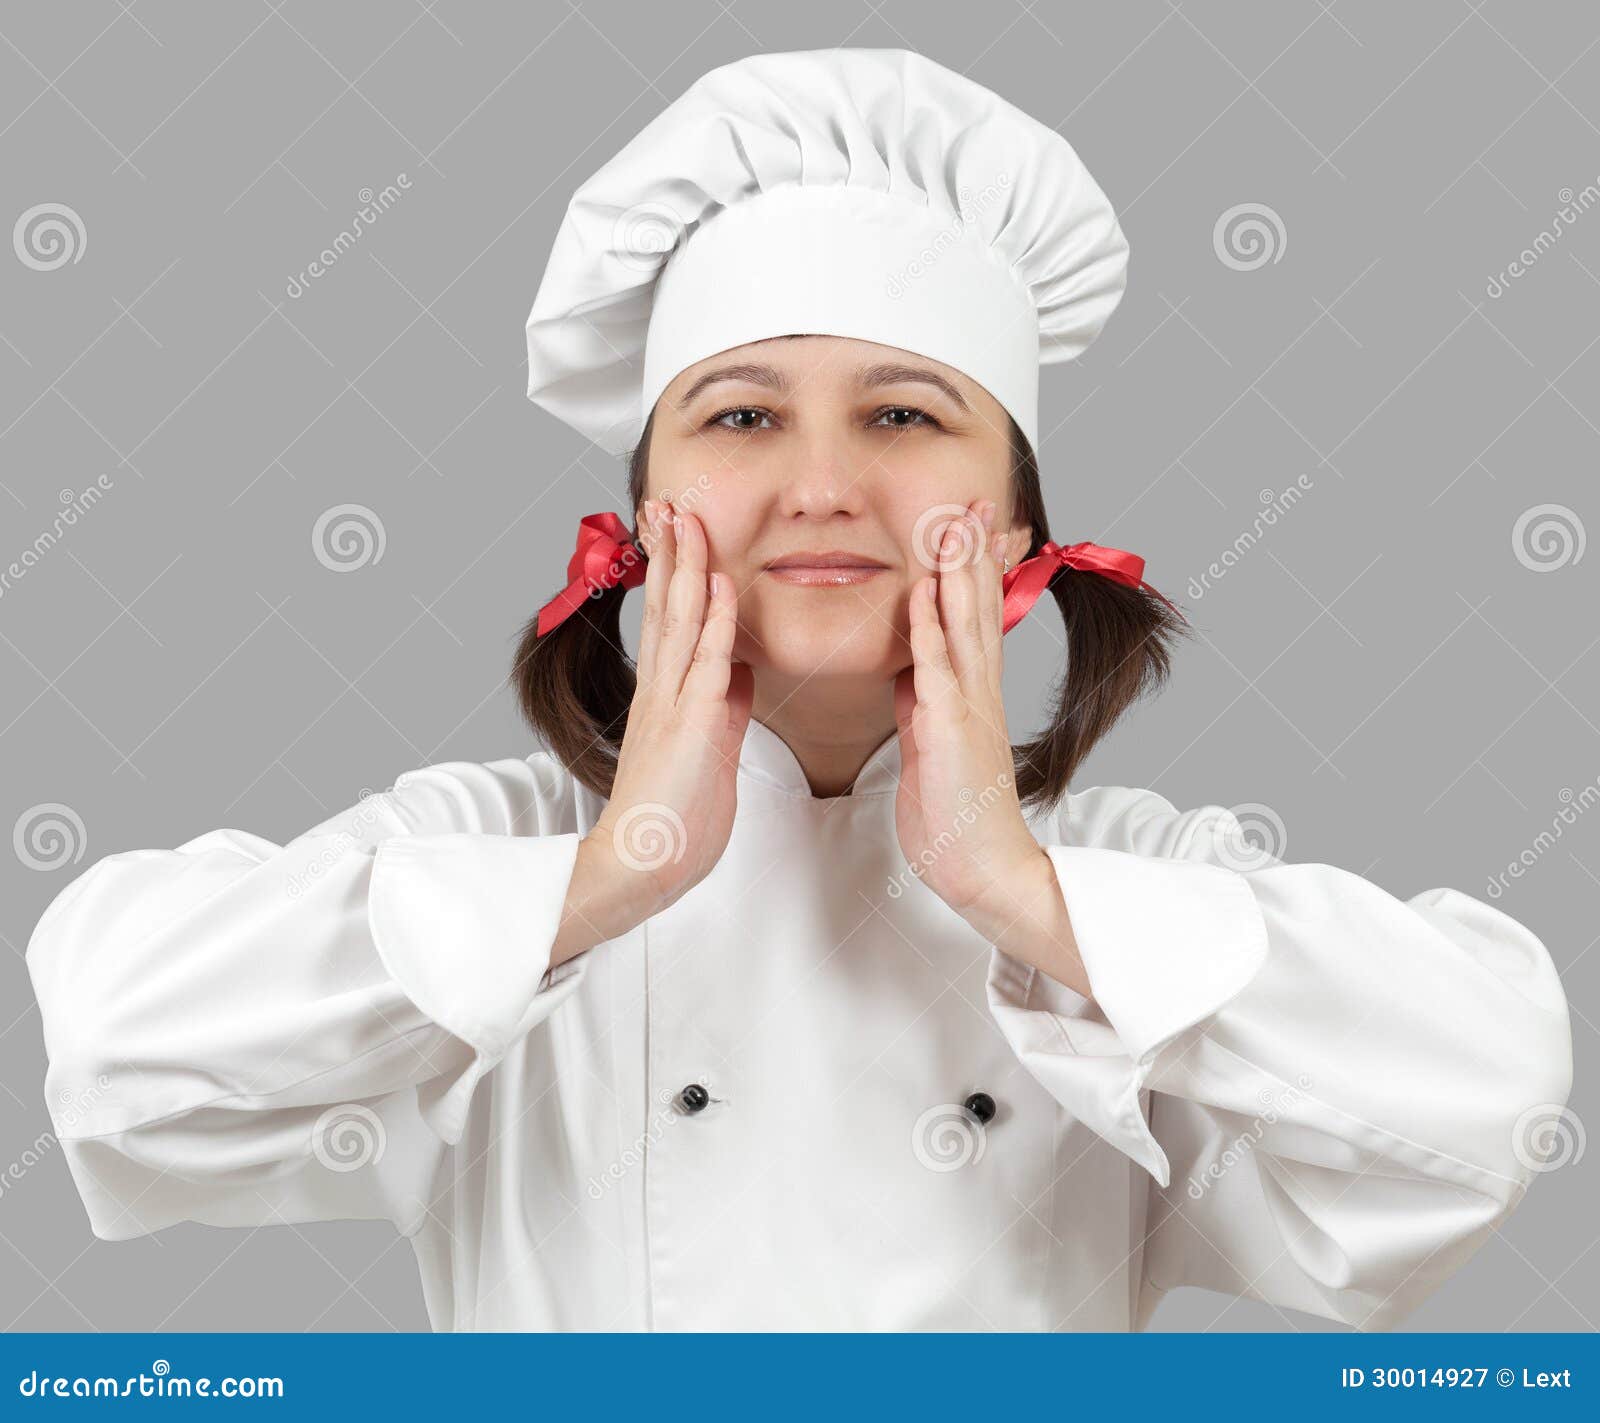 Chef Holding Hands in Front of Stock Image - Image of background, hair ...